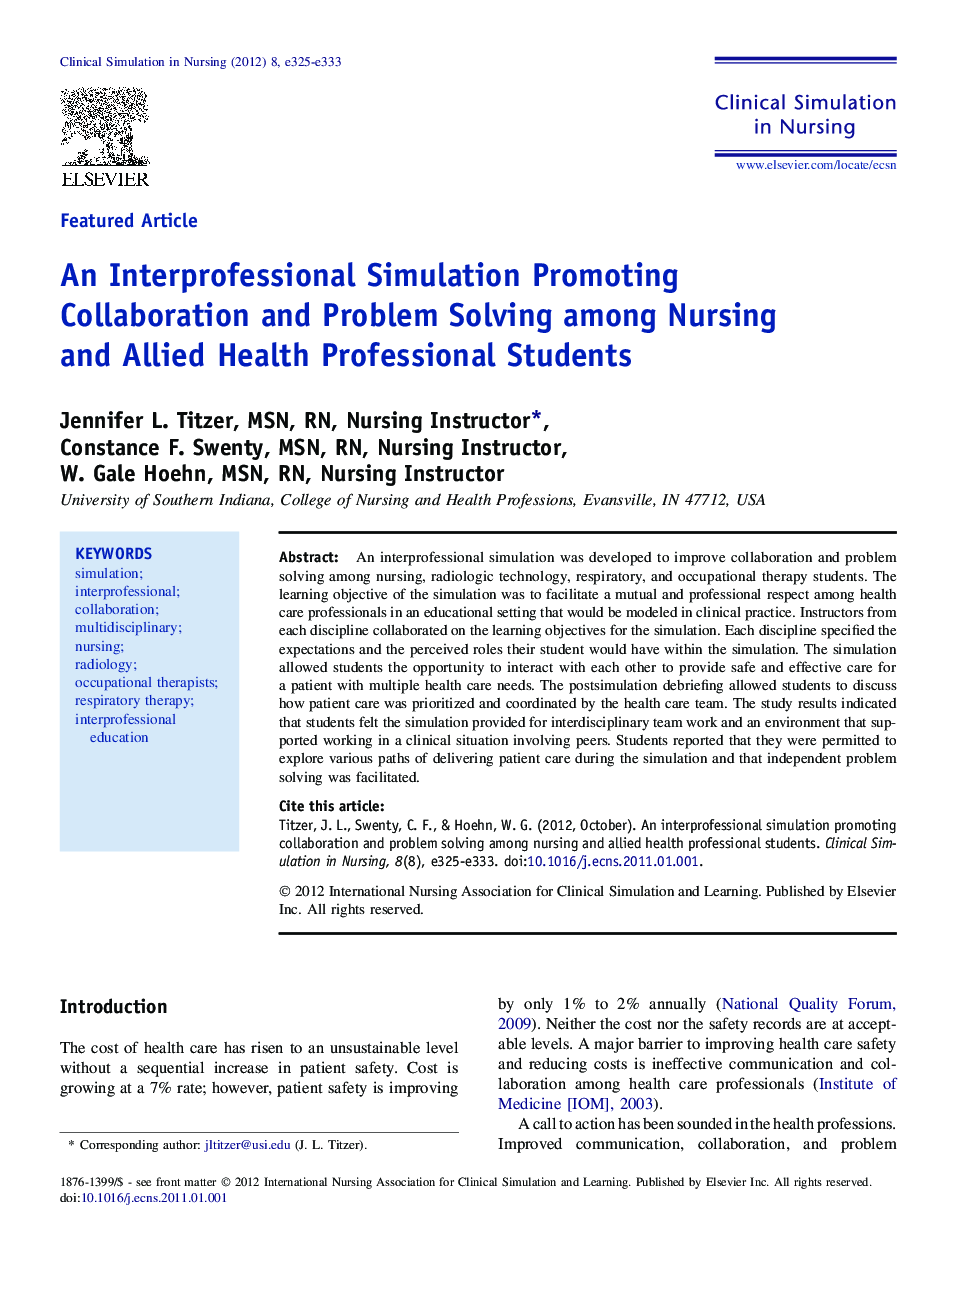 An Interprofessional Simulation Promoting Collaboration and Problem Solving among Nursing and Allied Health Professional Students